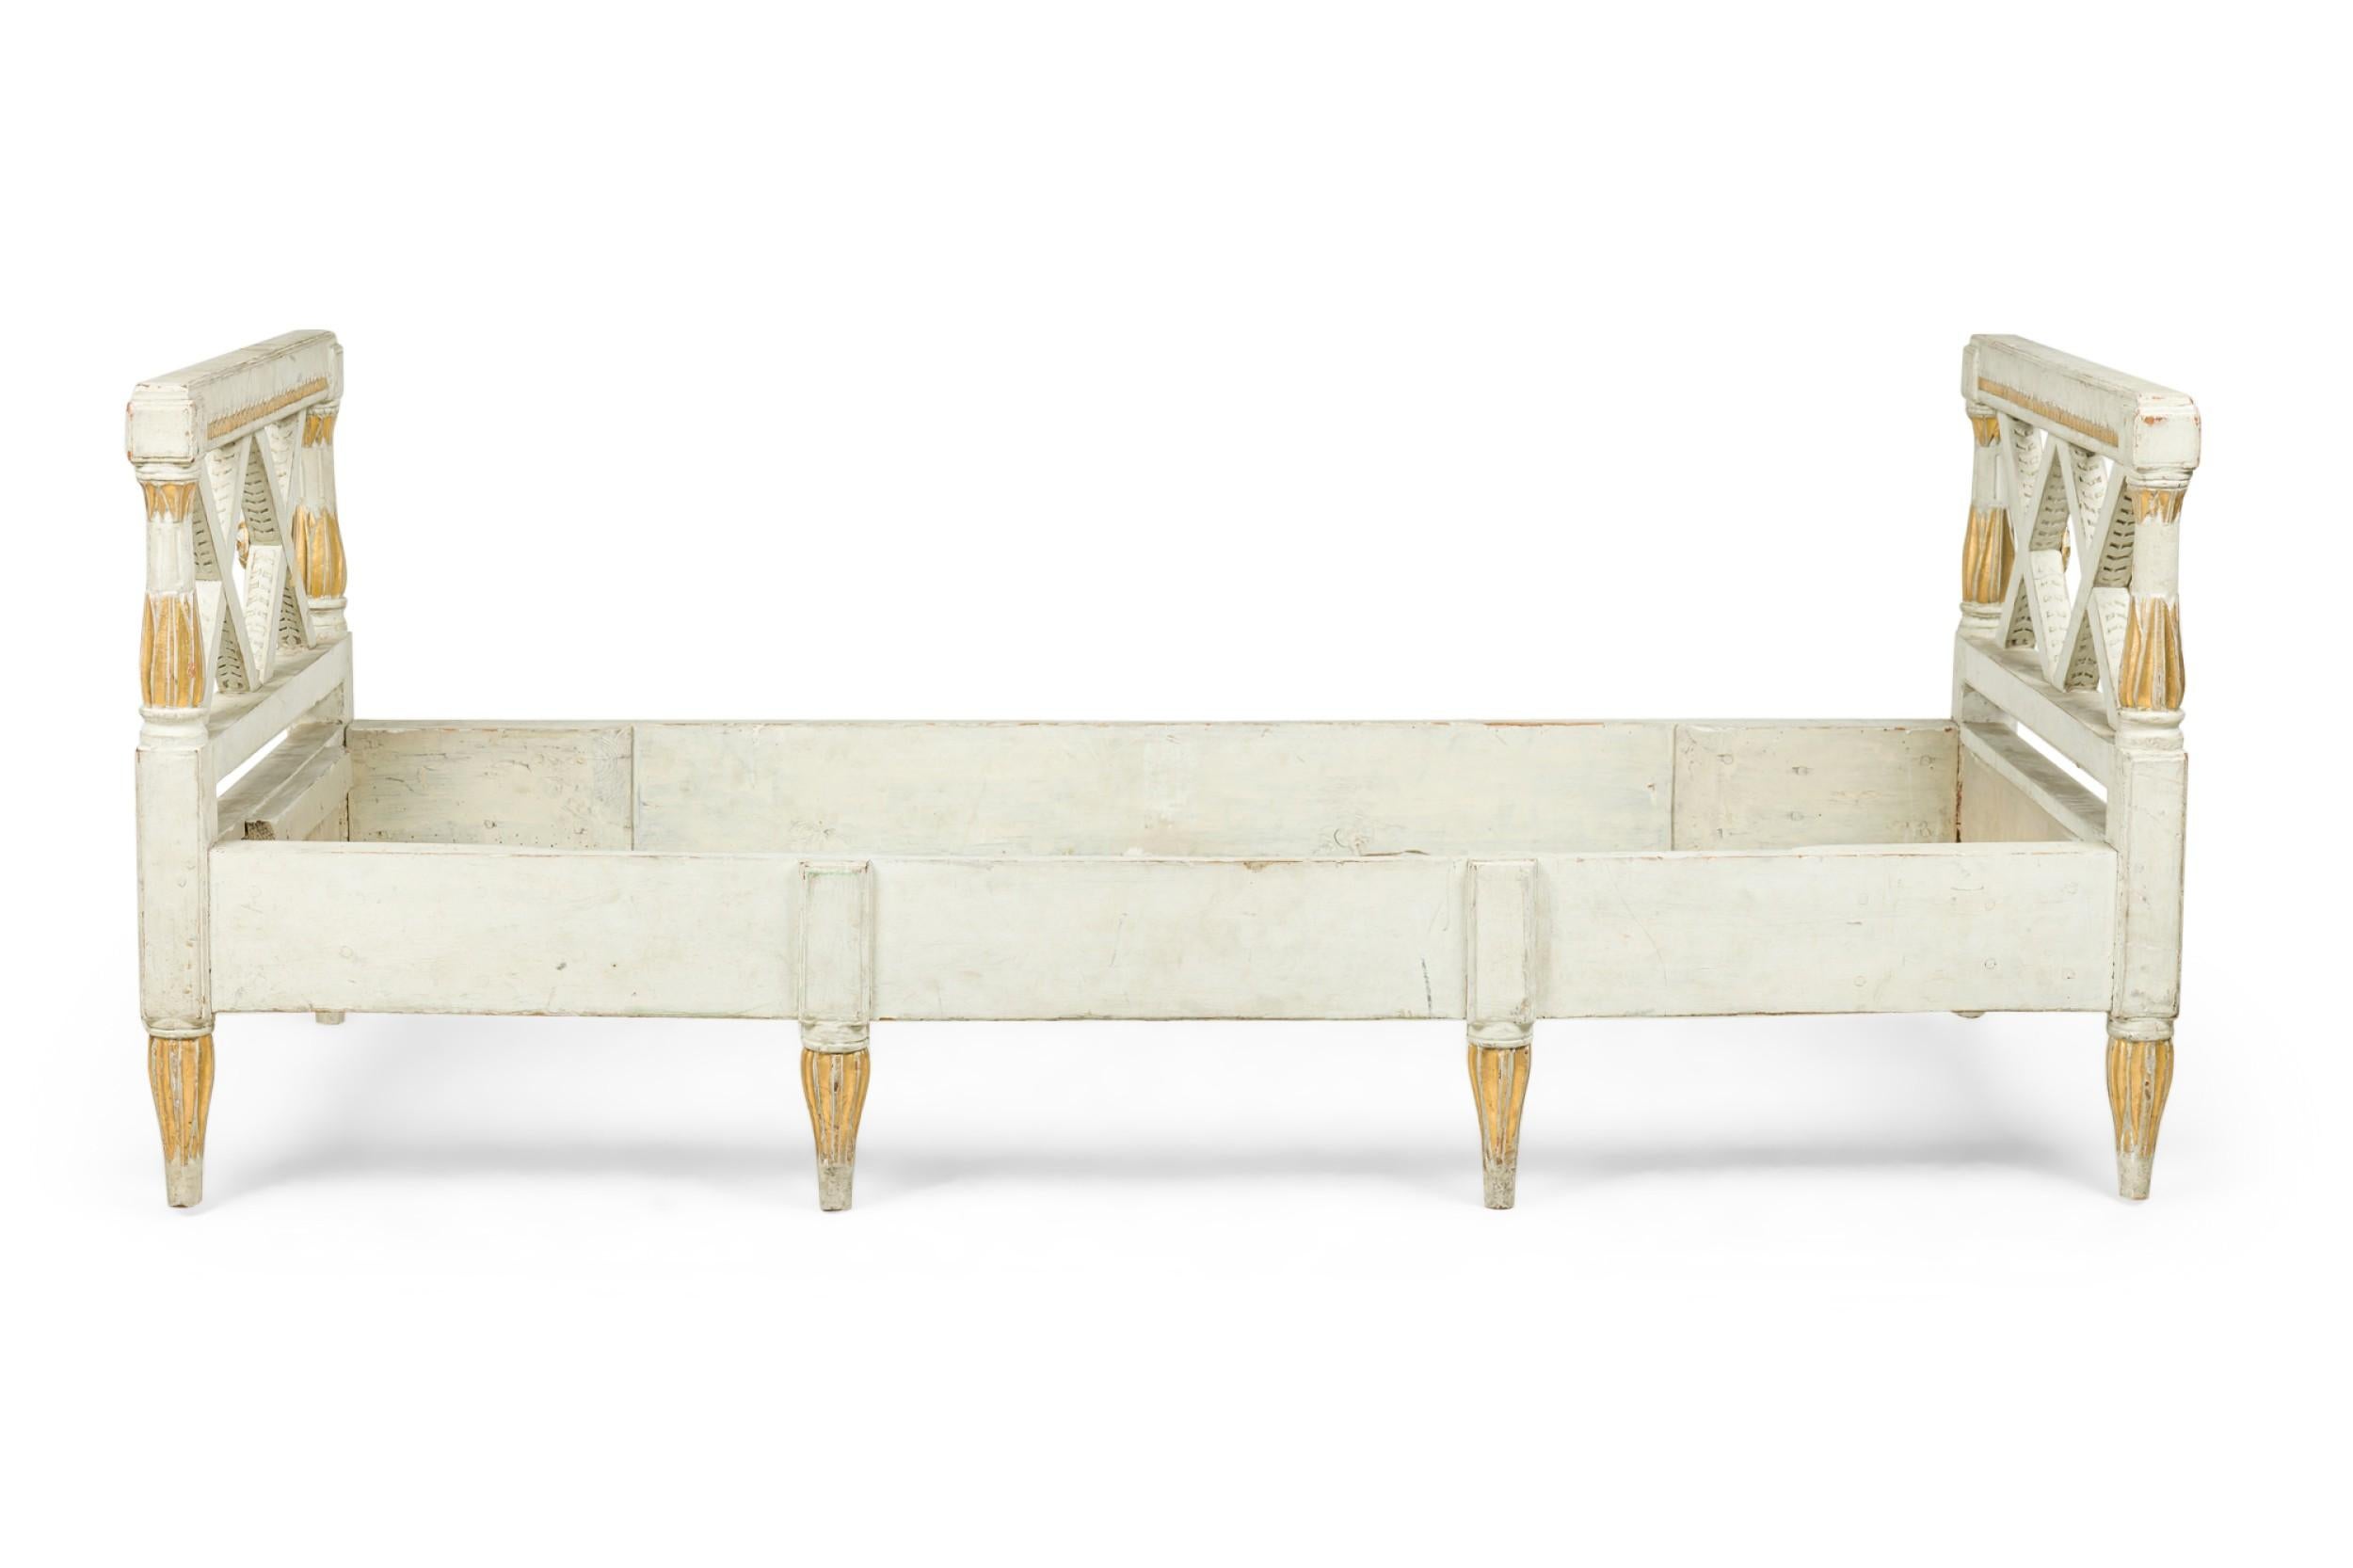 Swedish Neo-Classic (18/19th Century) white painted and gilt trimmed daybed with with carved open double X design side arms with a singe beige and green patterned upholstered cushion and resting on tapered shaped fluted legs
 

 Condition: painted